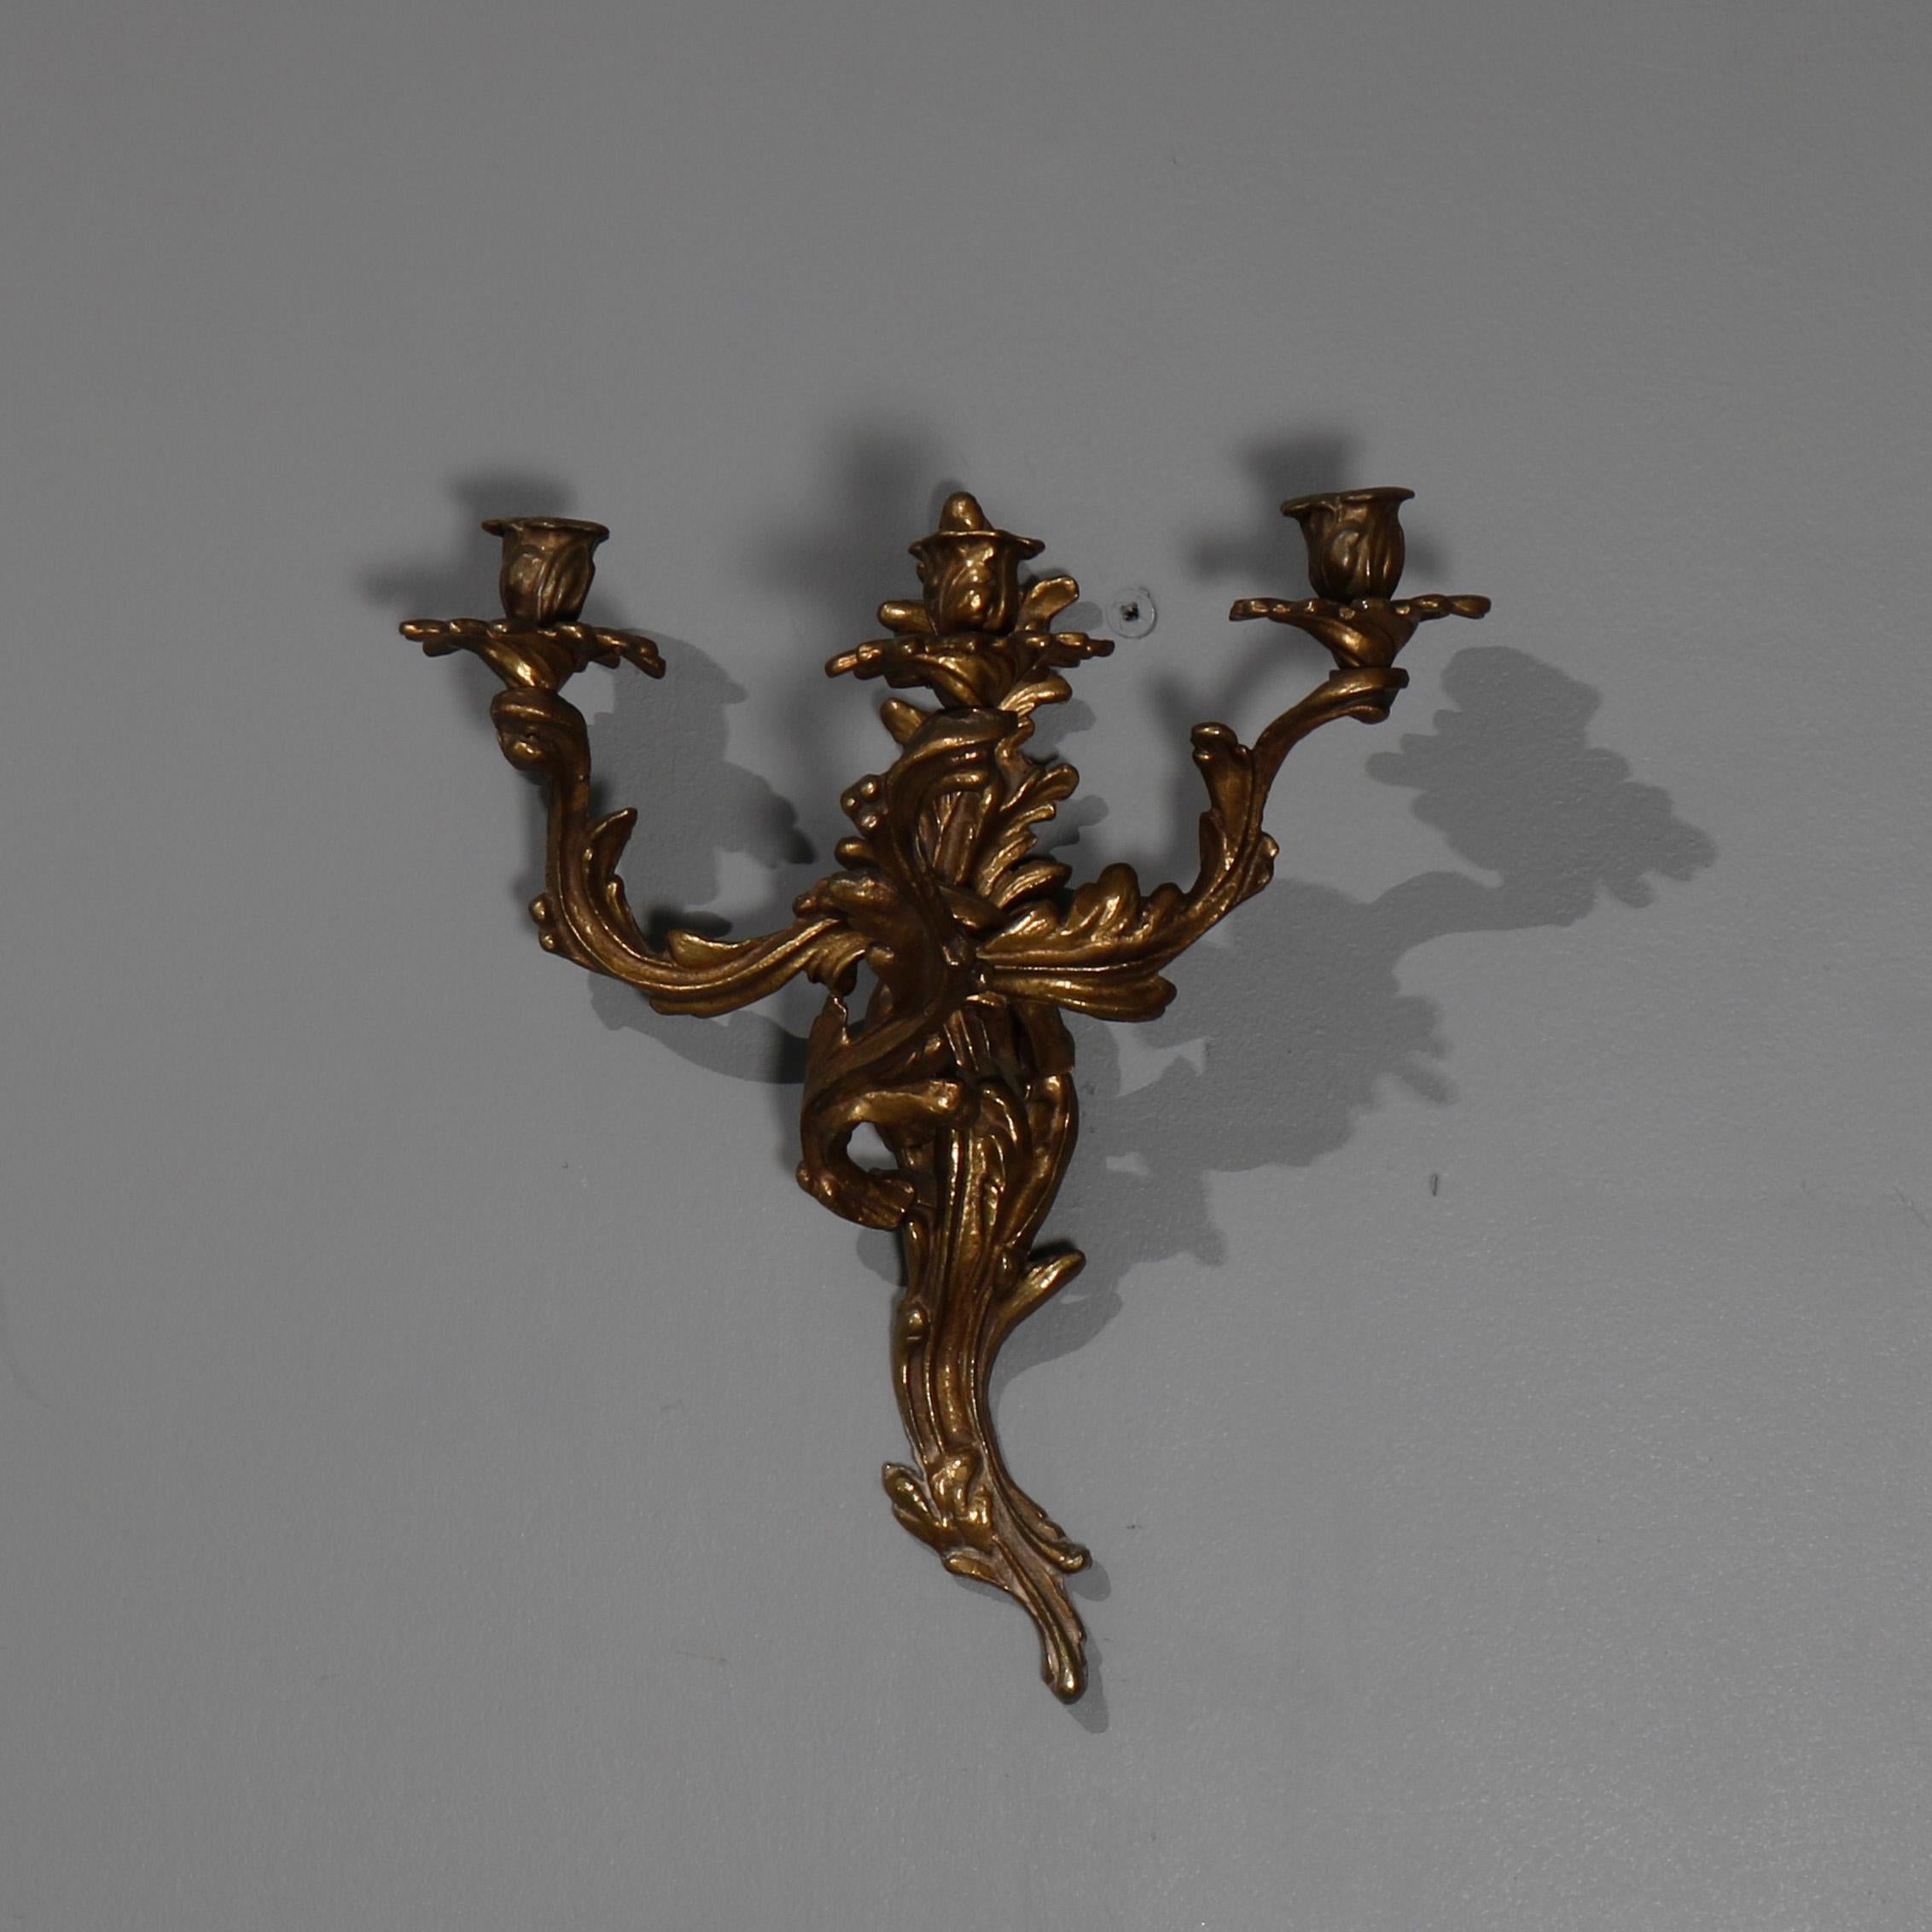 Cast Pair of Antique French Louis XIV Bronze Three-Arm Foliate Candle Wall Sconces